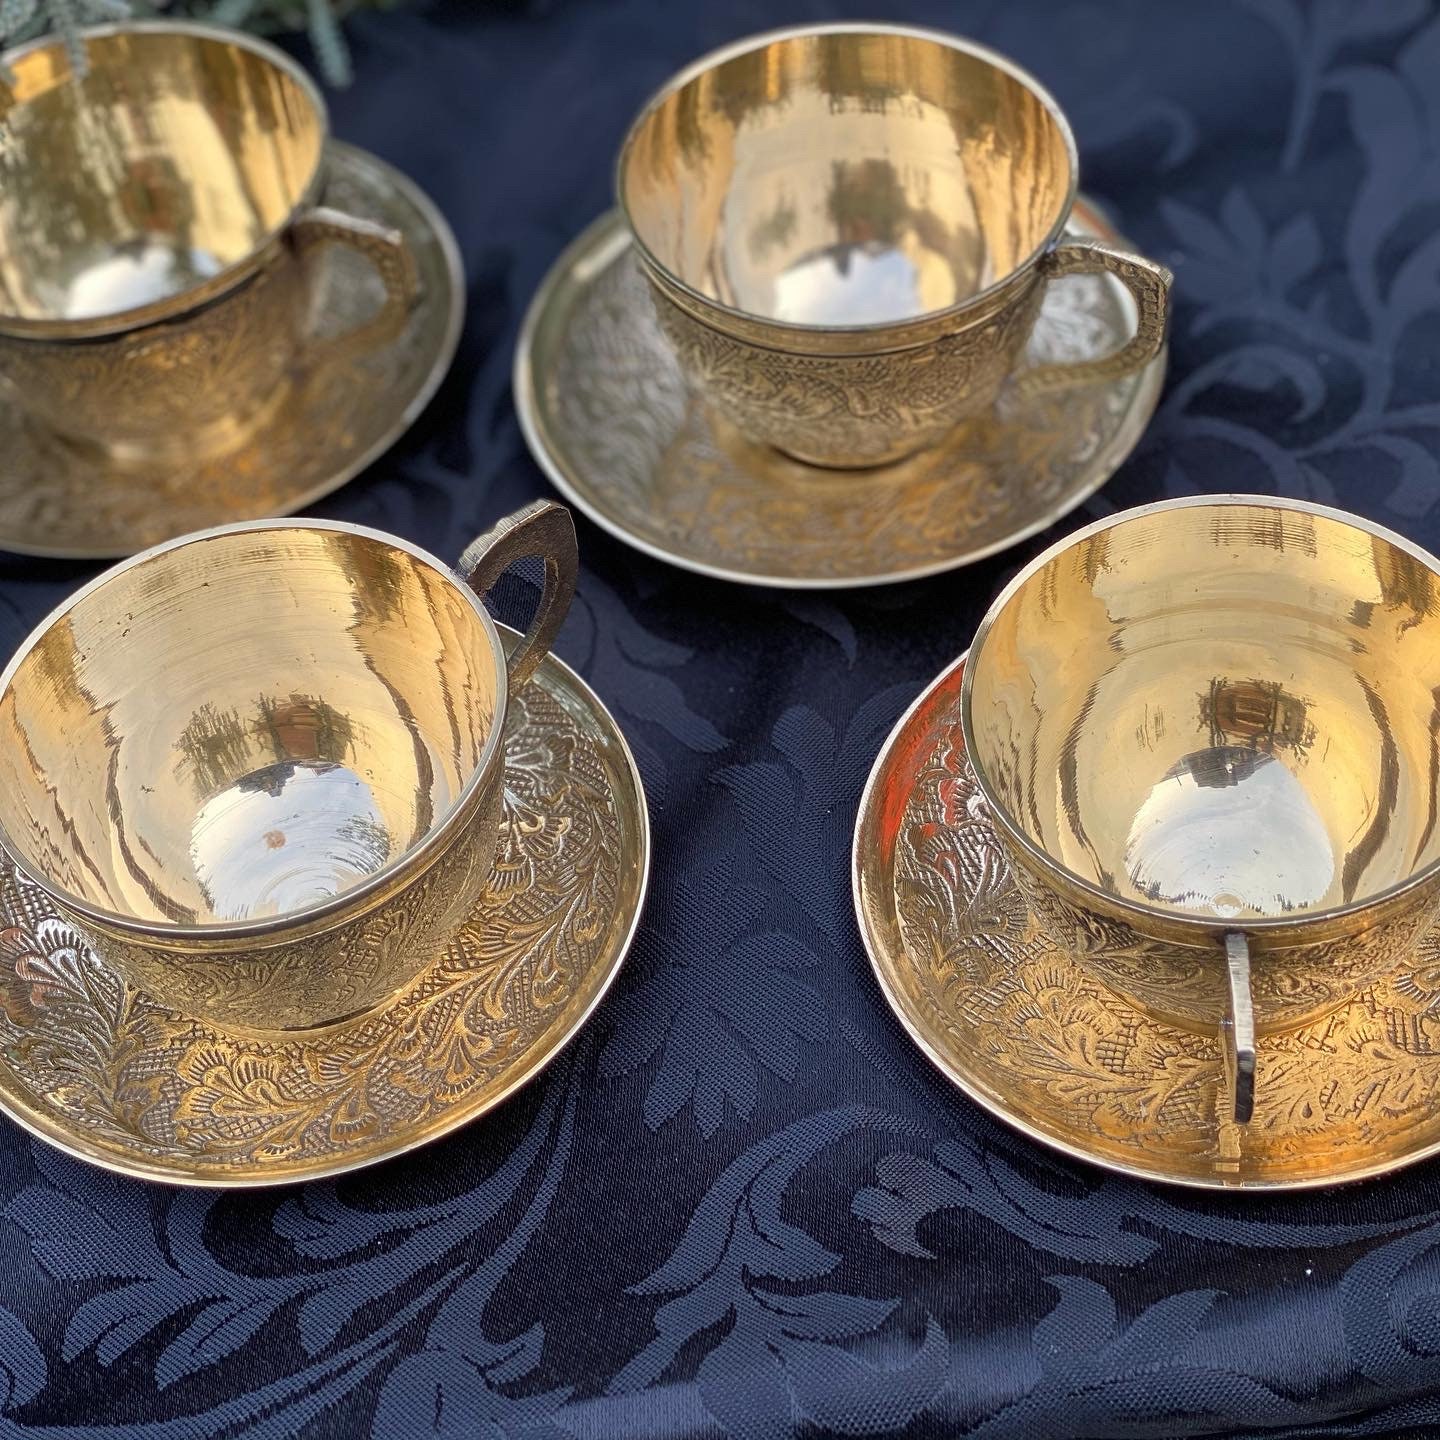 Vintage Decorative Brass Tea Set, Pitcher, Cup, Spoon and Tray Set, Made in  India, Brass, Vintage 1960s -  Canada